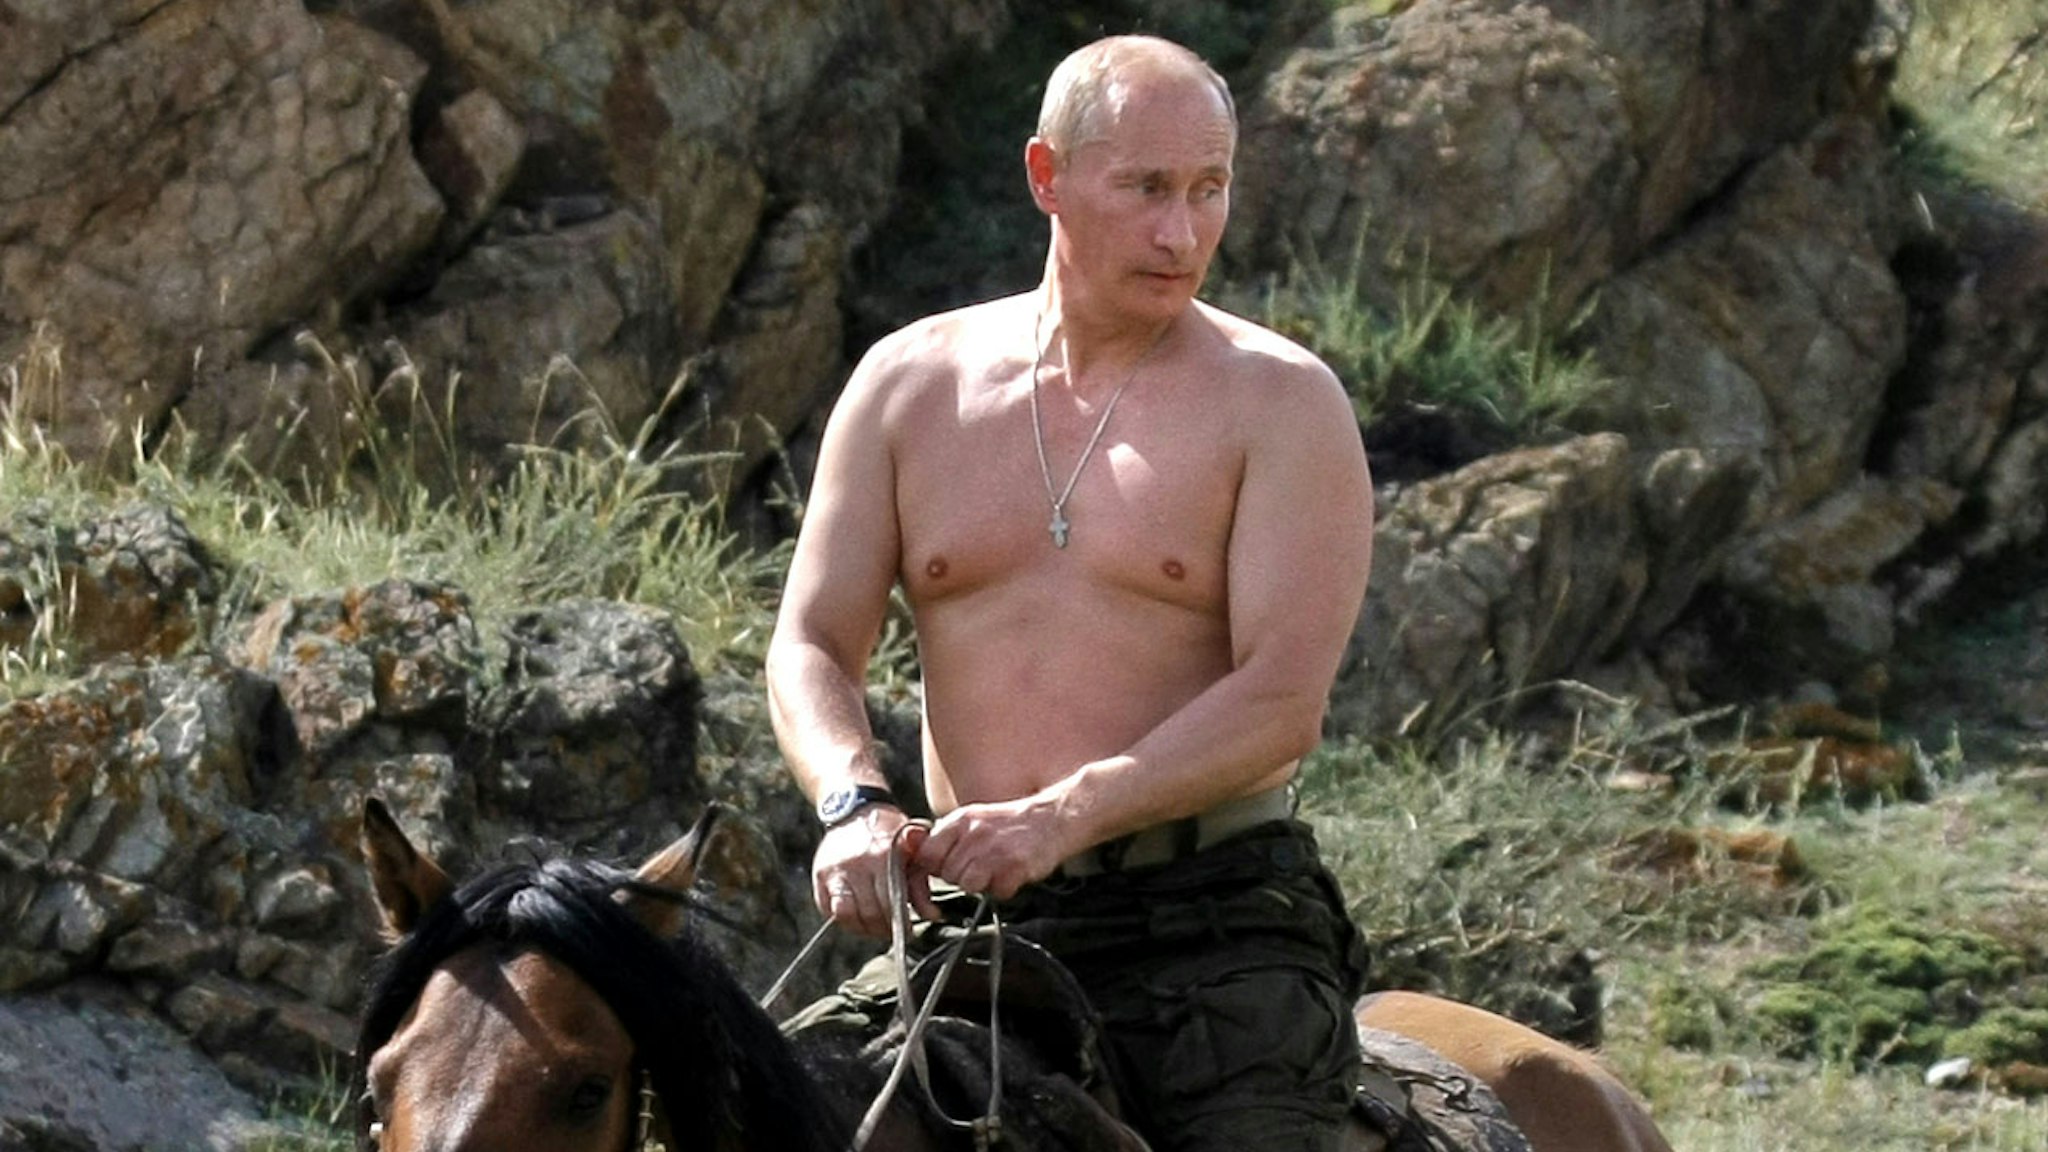 TOPSHOT - Russian Prime Minister Vladimir Putin rides a horse during his vacation outside the town of Kyzyl in Southern Siberia on August 3, 2009.